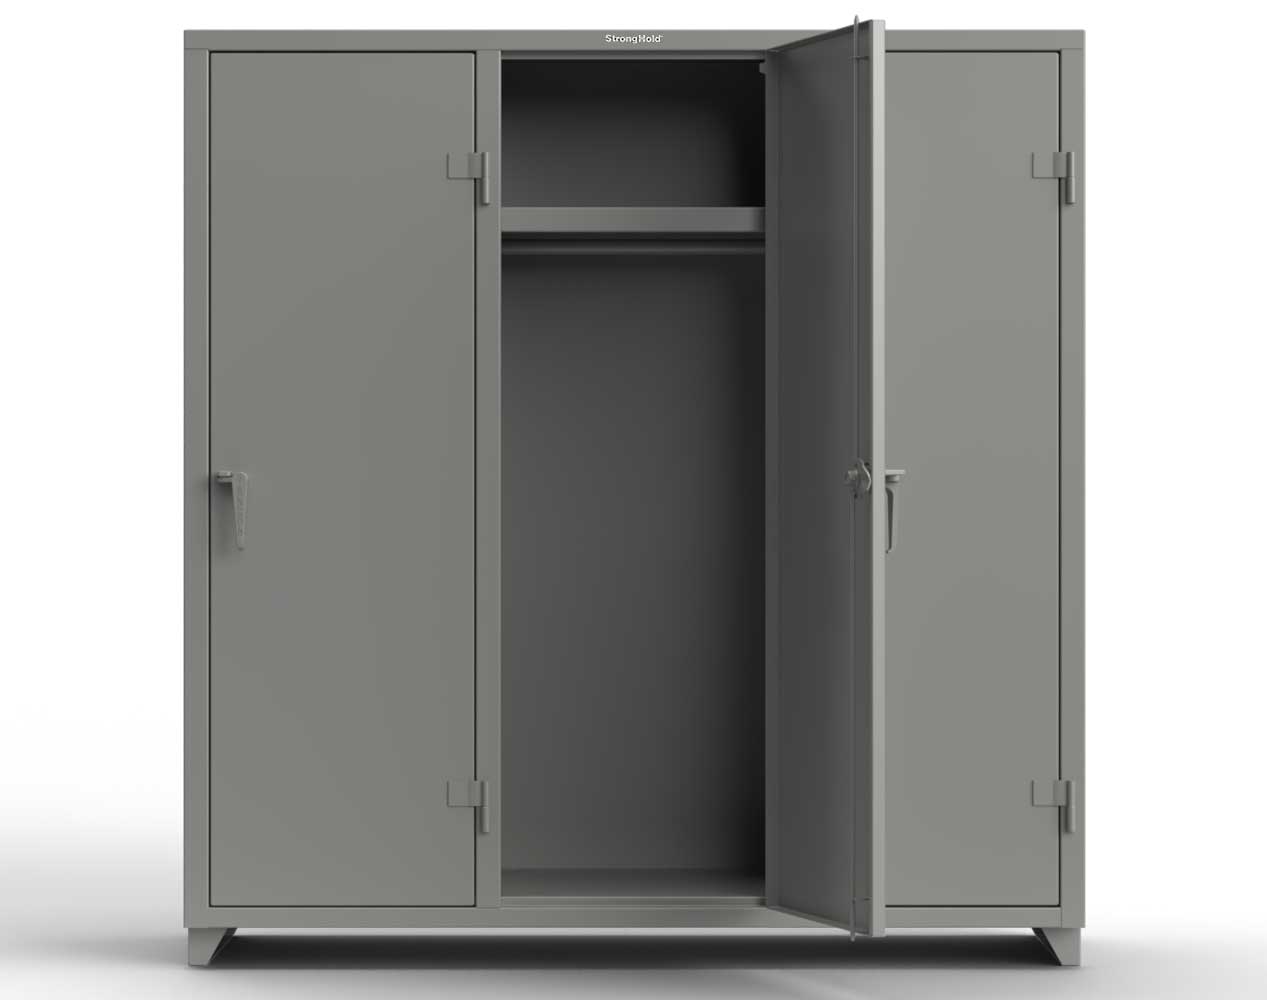 Extra Heavy Duty 14 GA Single-Tier Locker with Shelf and Hanger Rod, 3 Compartments - 72in. W x 24 in. D x 75 in. H